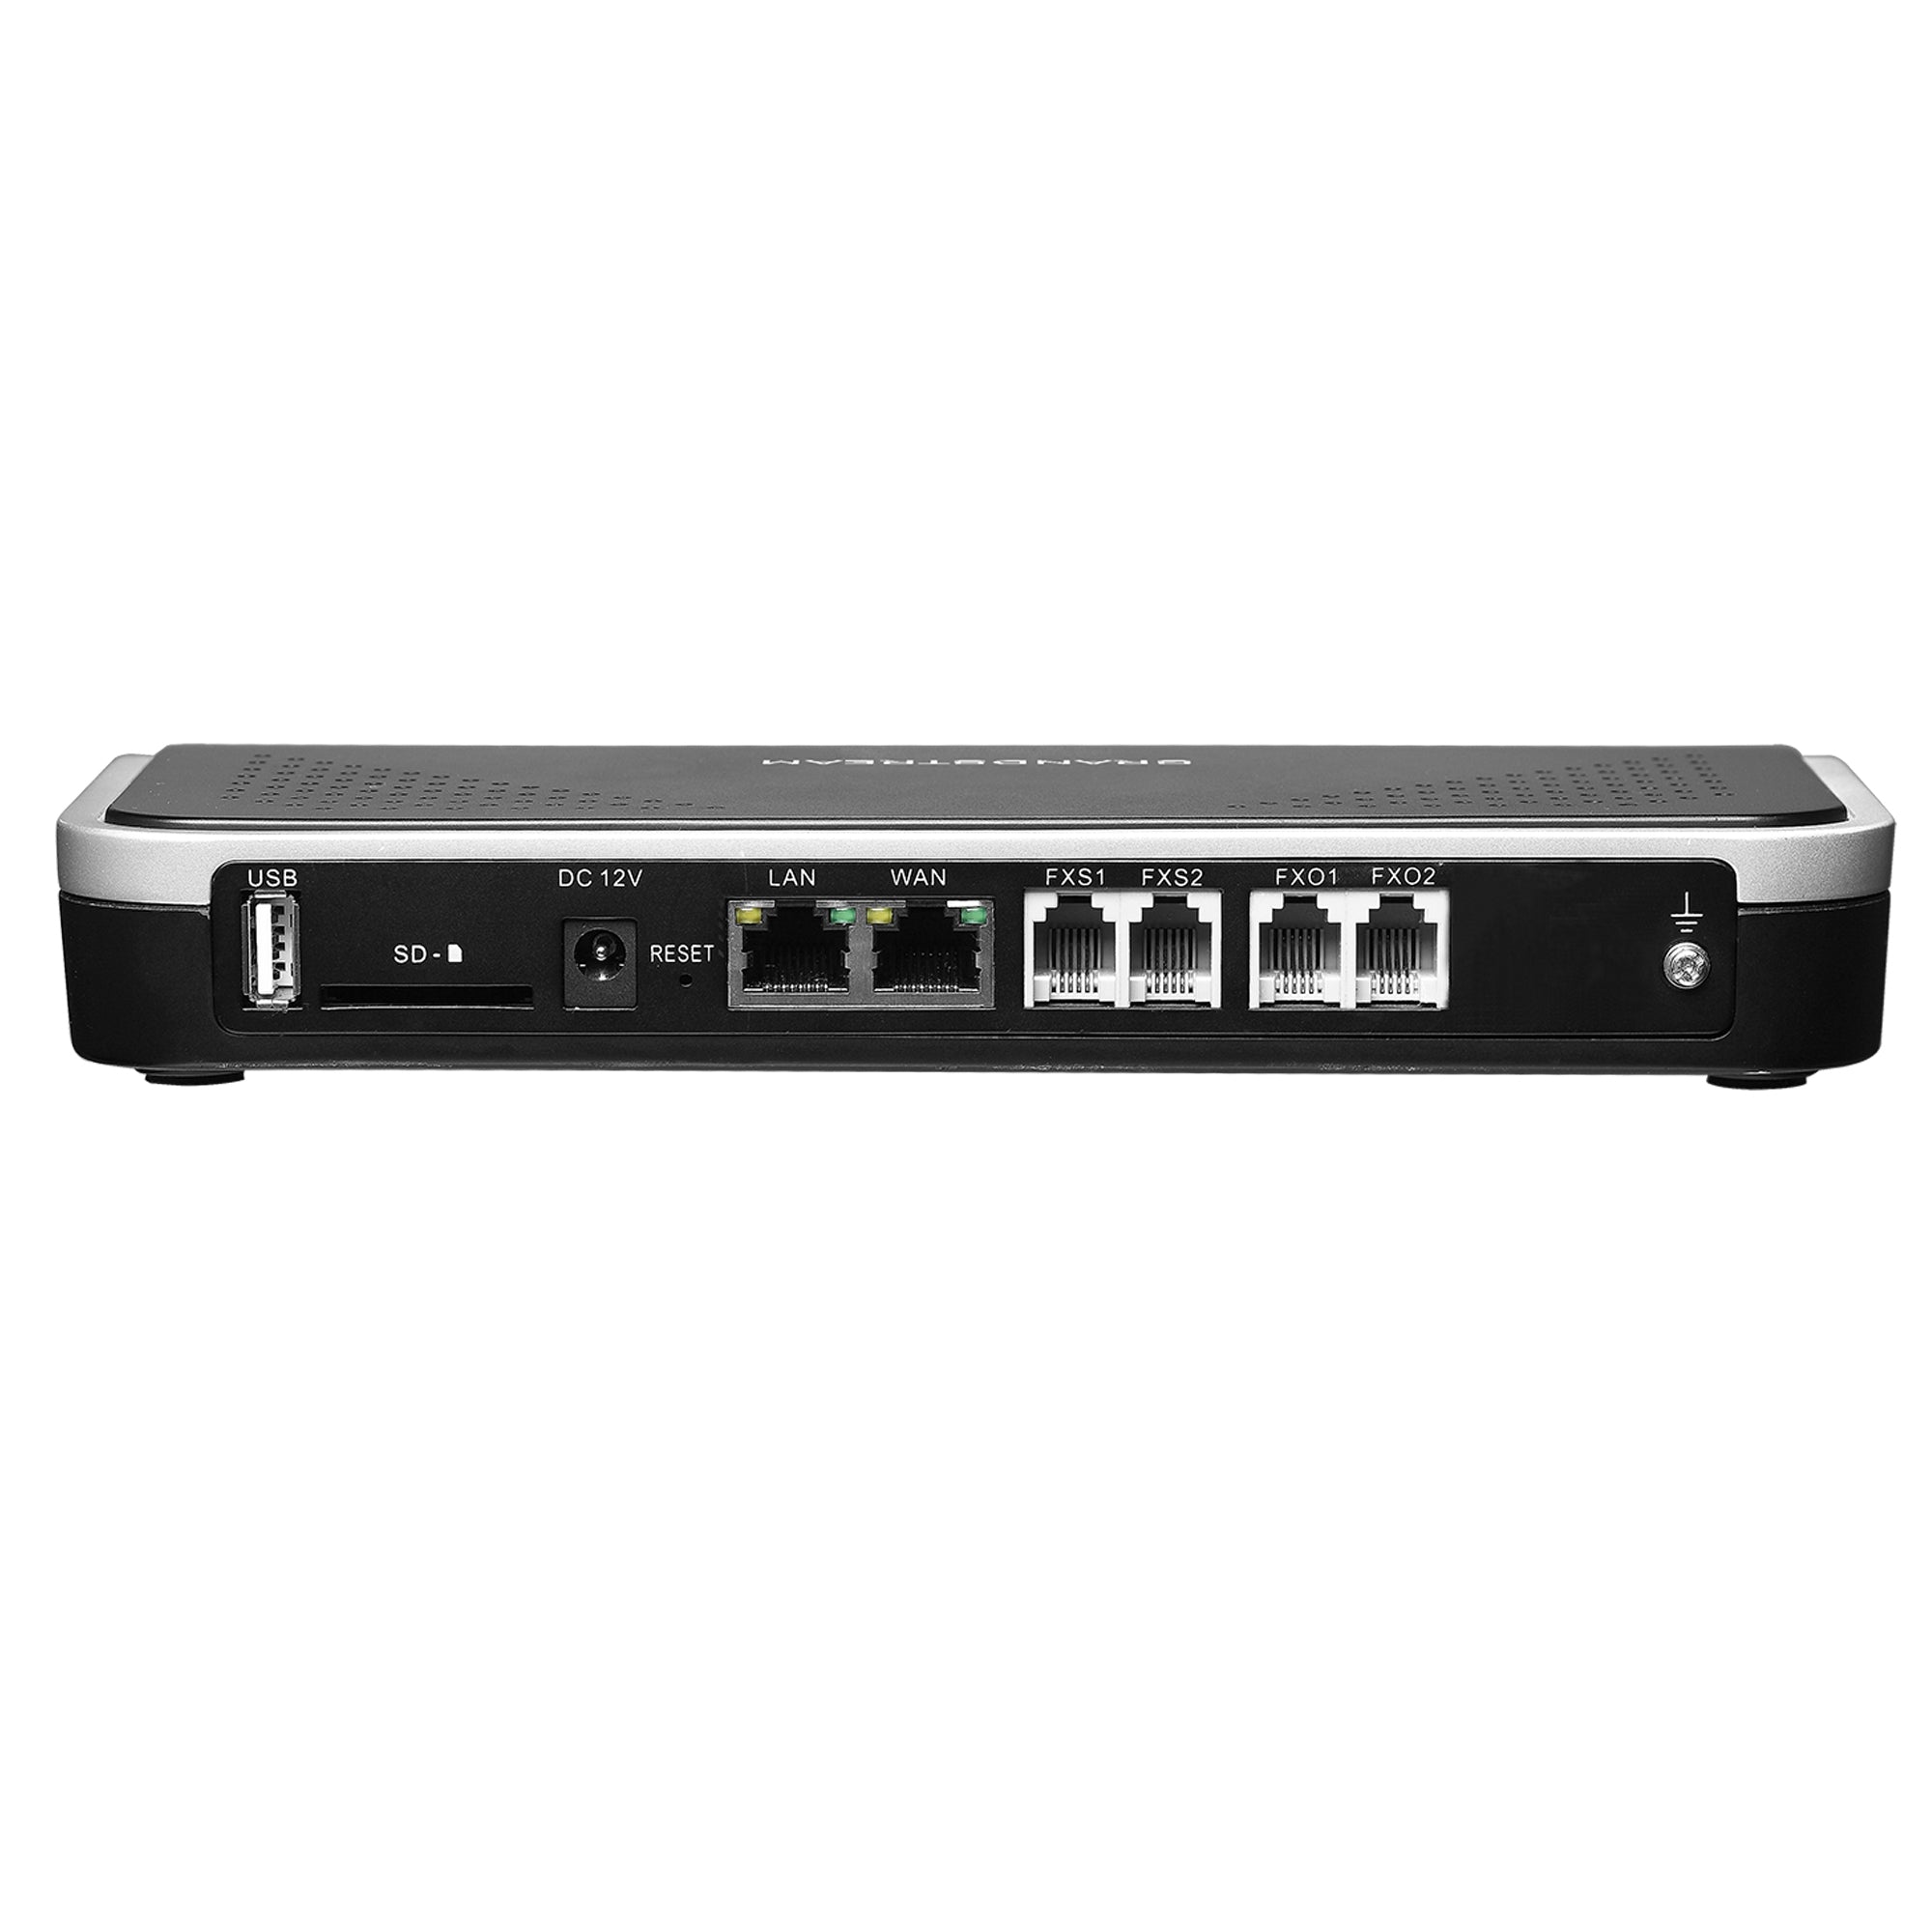 Central Telefónica Grandstream Ucm6202 Ip Pbx (Private & Packet-Switched) System 500 Usuario(S) Negro Si